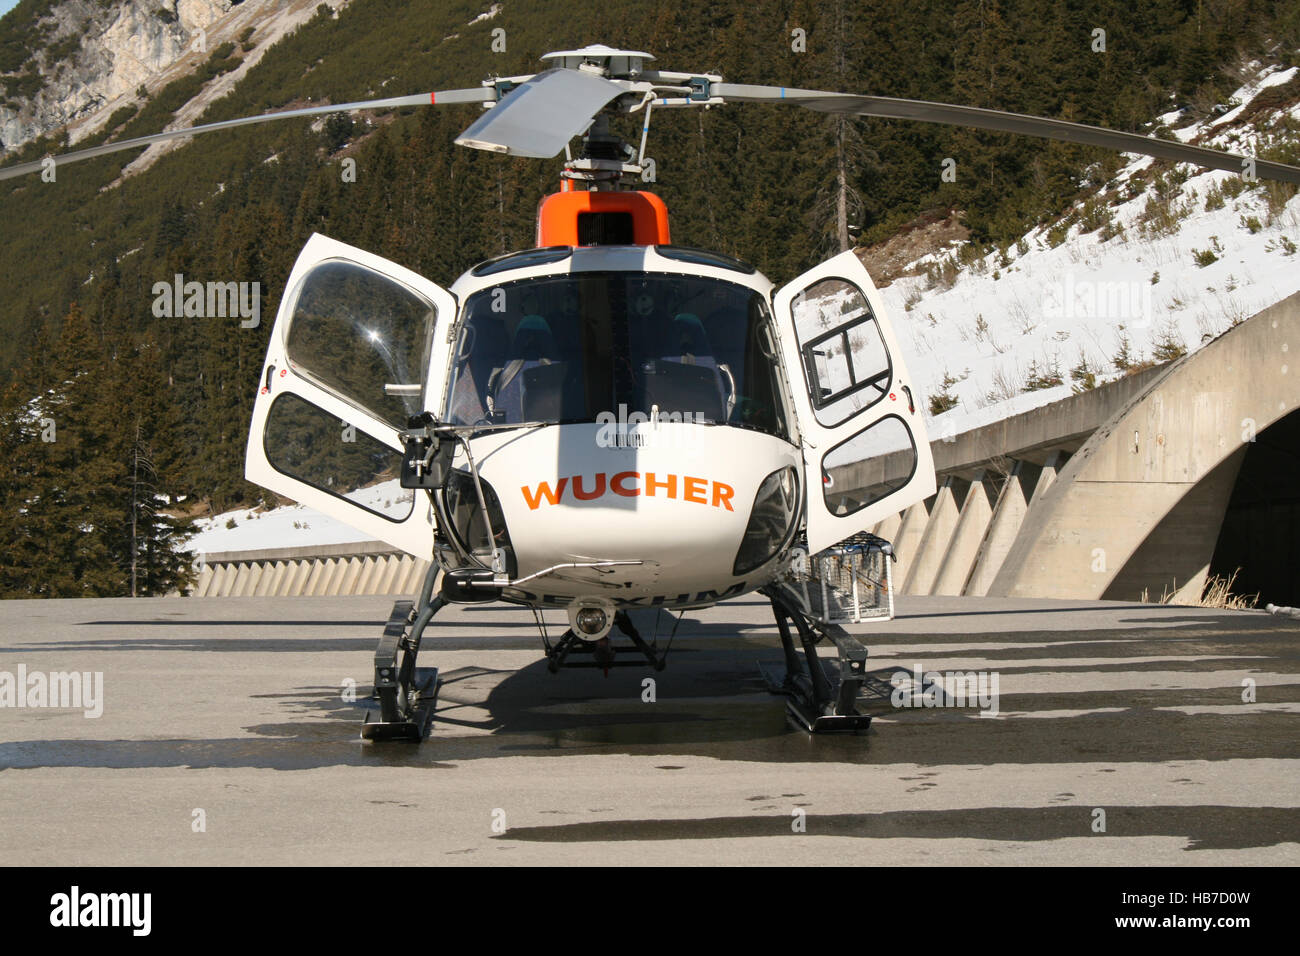 Waeth/Austria January 3, 2015: Flugrettung Helicopter at Warth Airport. Stock Photo